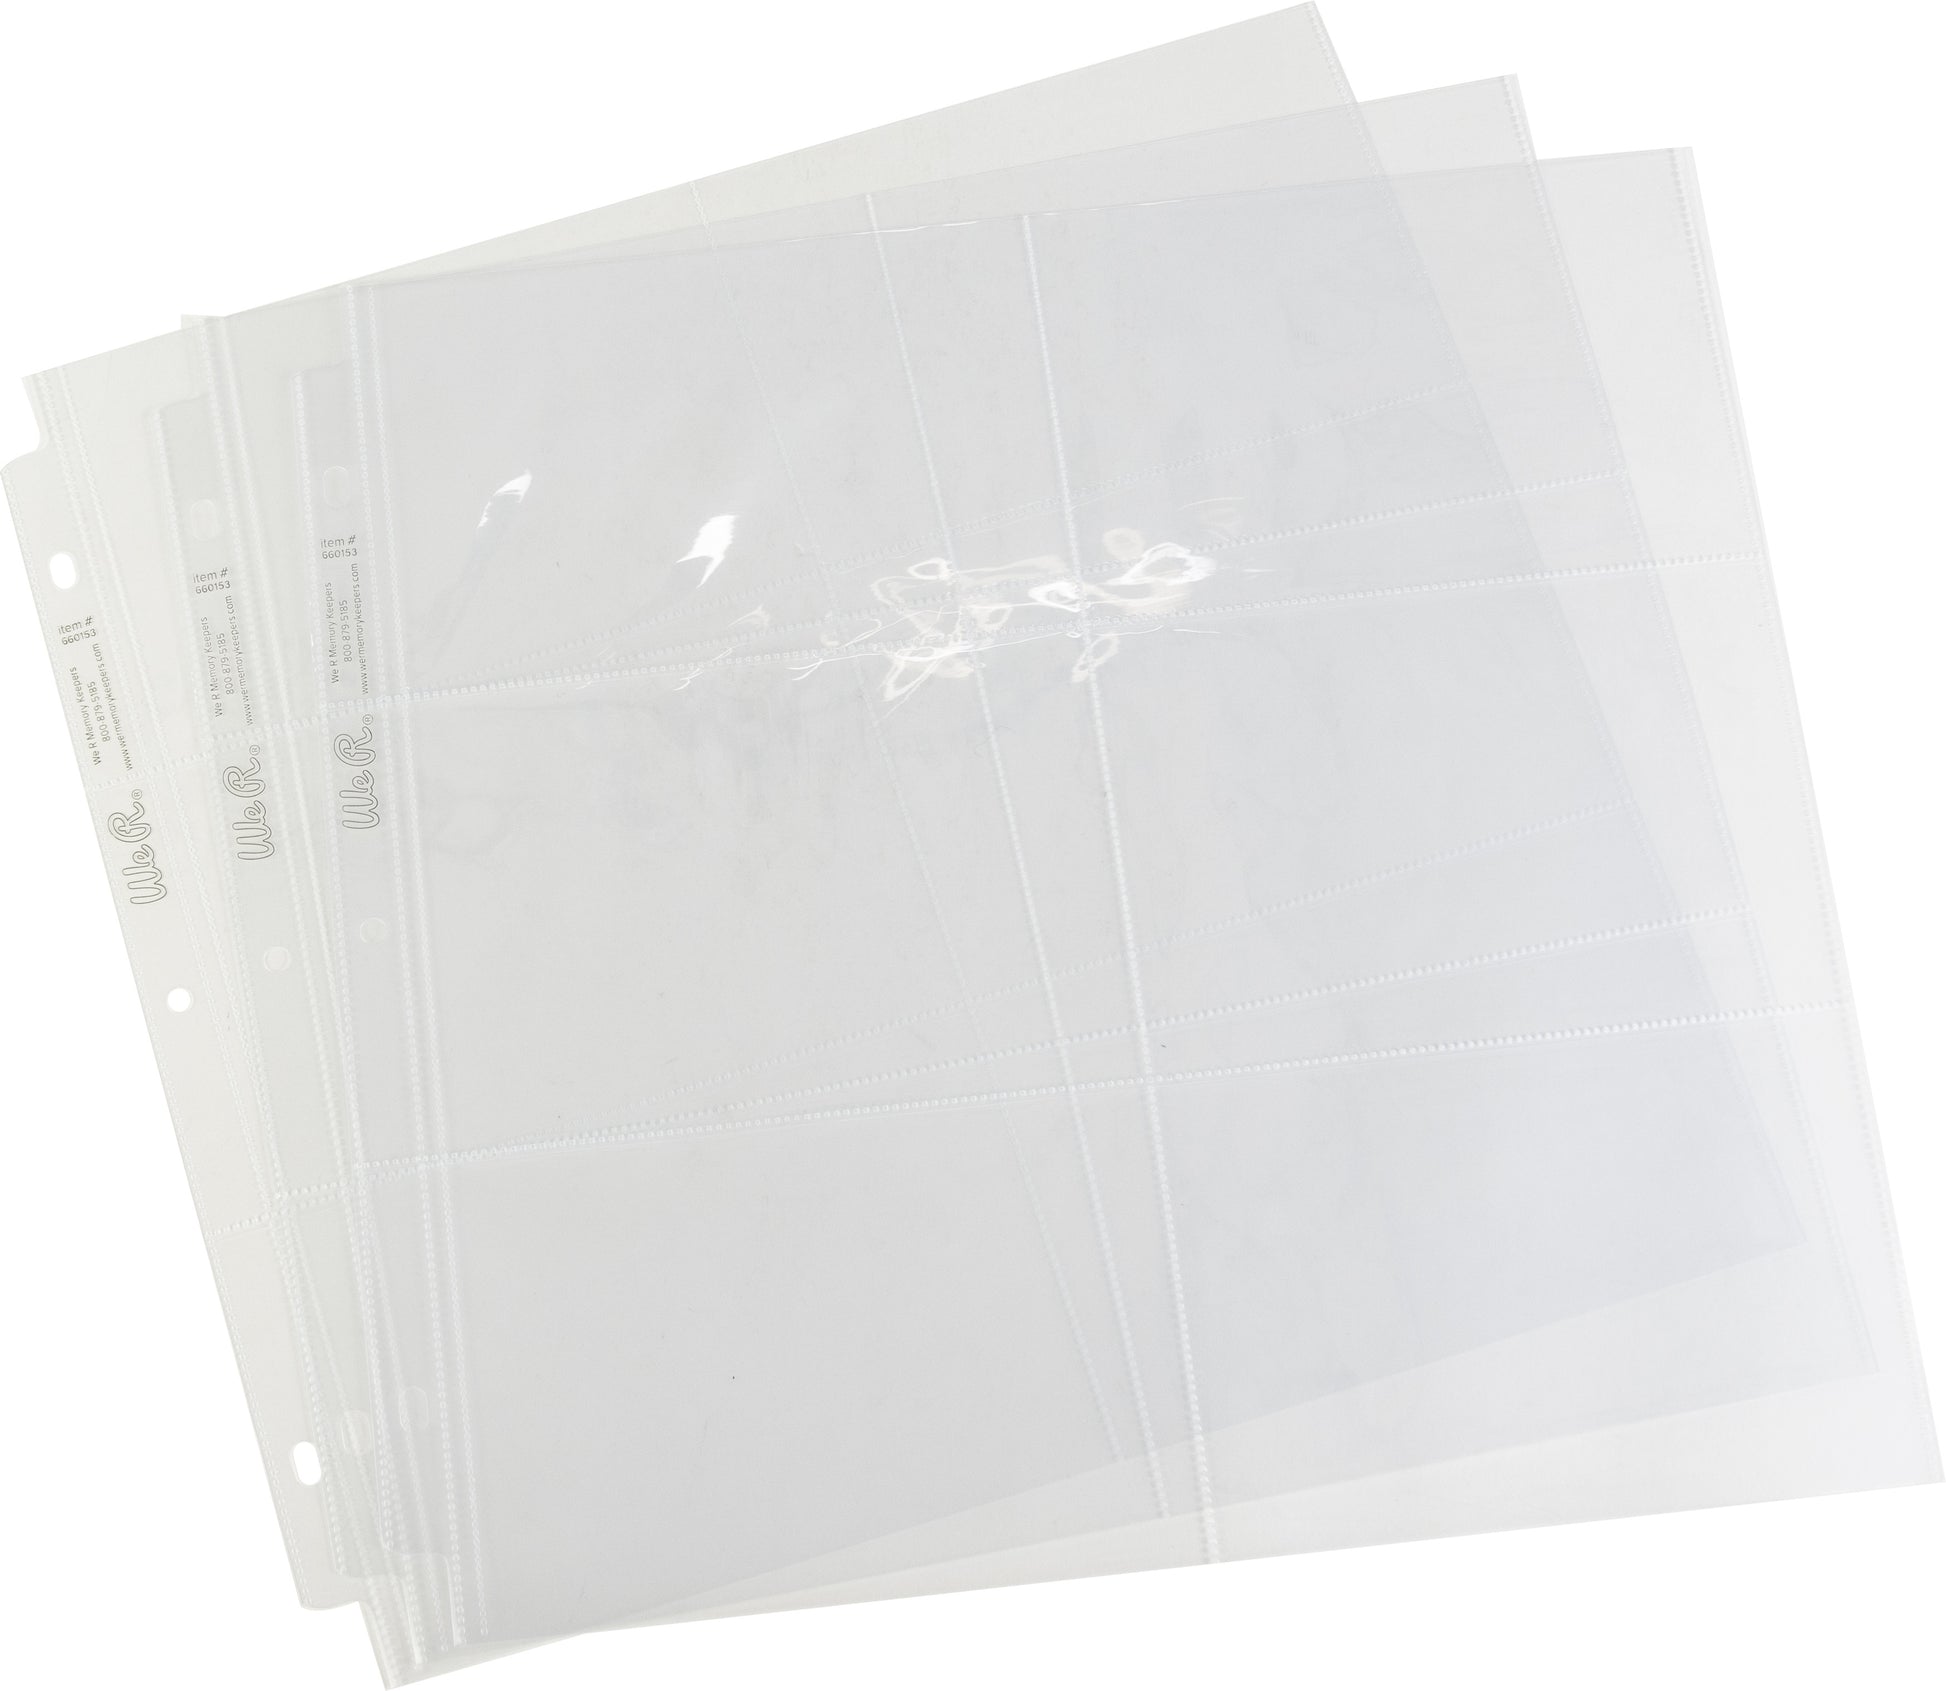 We R Memory Keepers Photo Sleeves 25 Sheets Holds 4x6 inch Photos 12x12  Lot 2